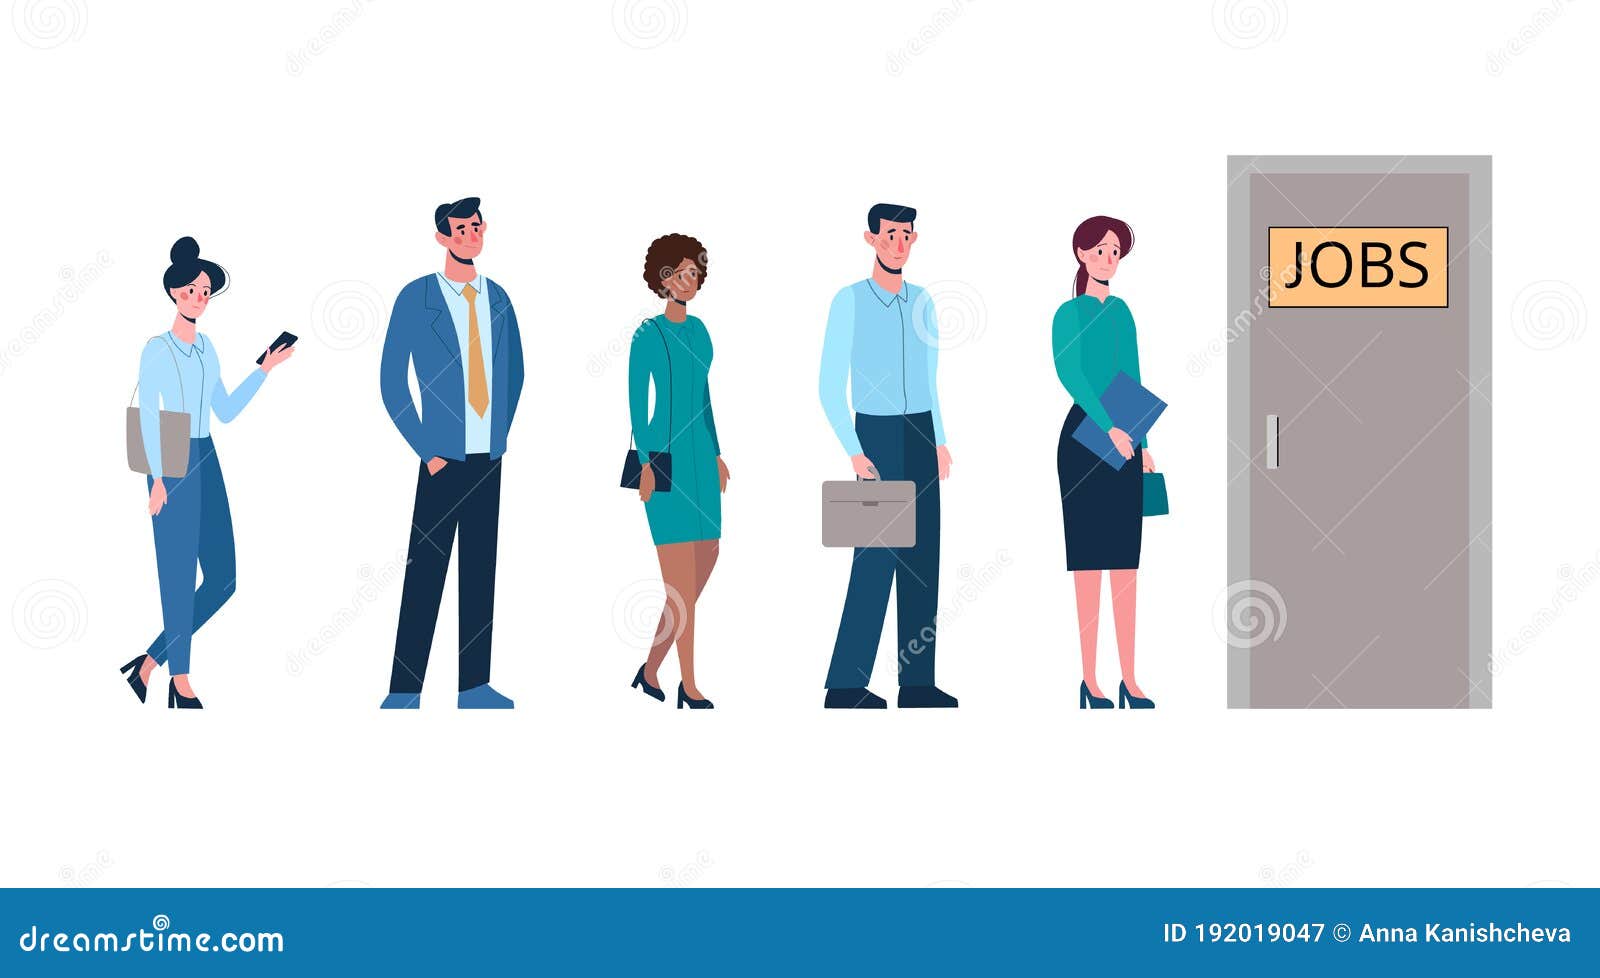 Competition of People for Jobs, Queue for an Interview. Unemployment,  Crisis. Business People Want To Get a Job Stock Vector - Illustration of  employment, crowd: 192019047